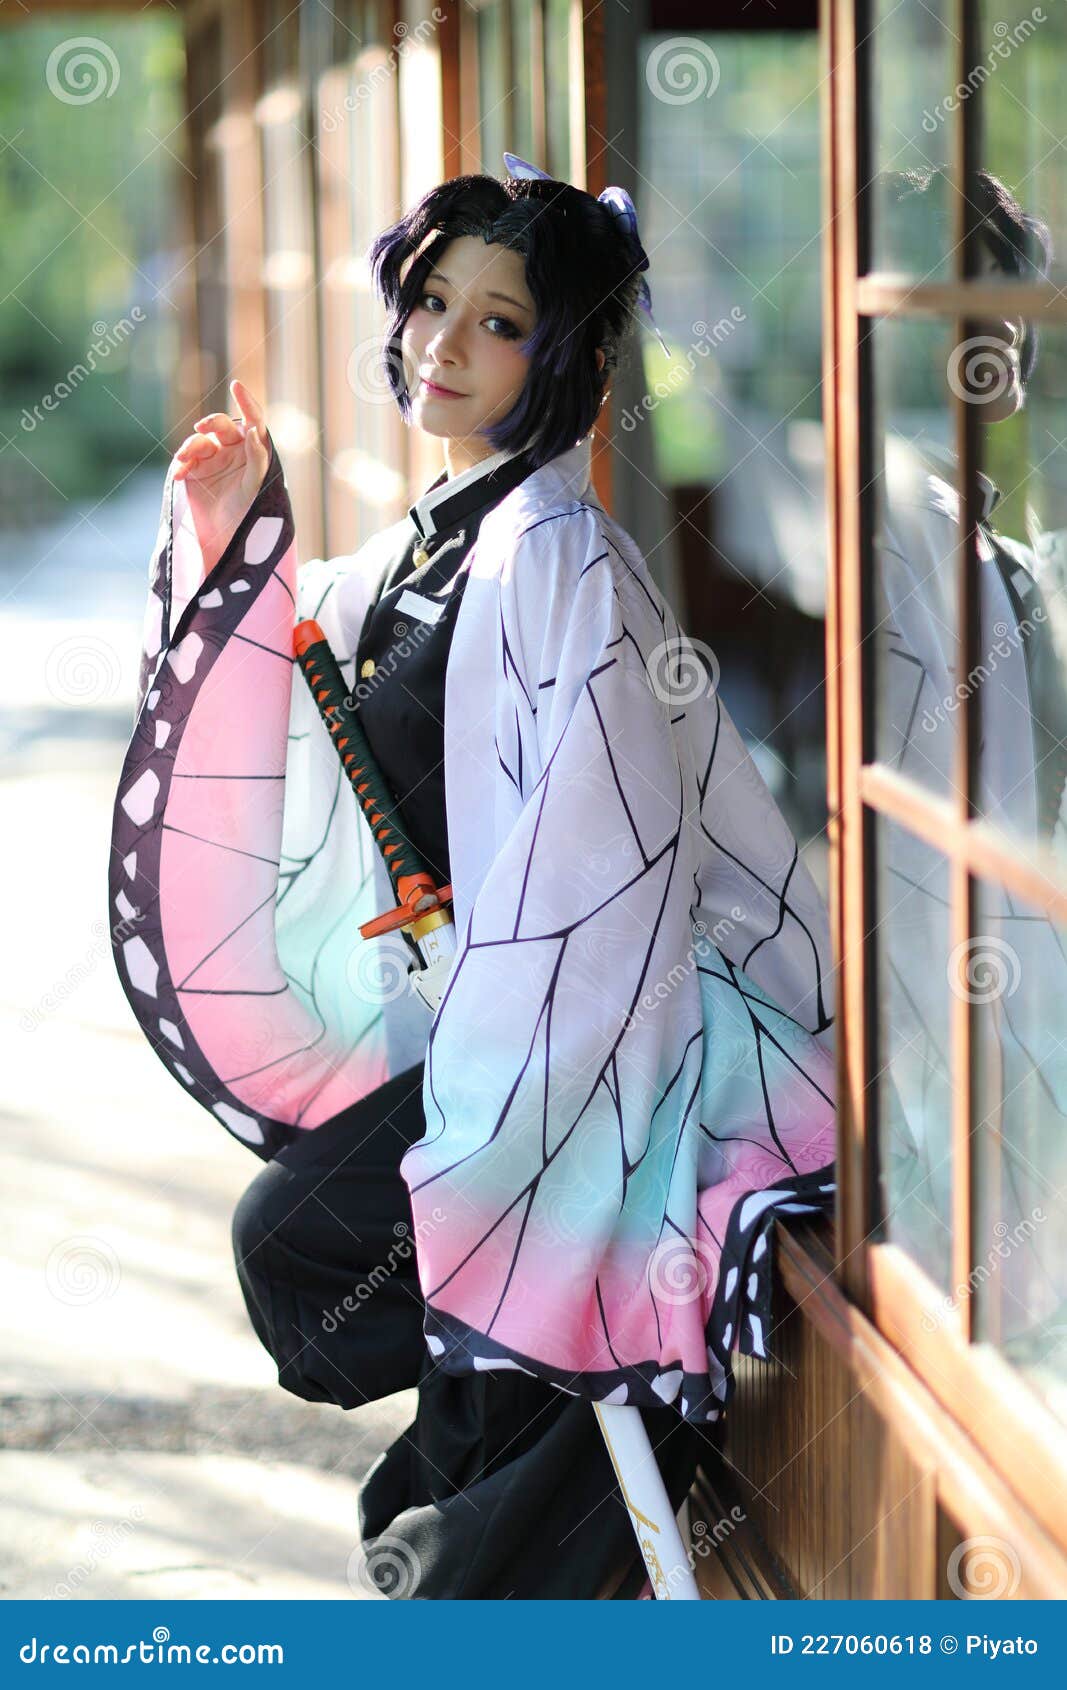 Japan Anime Cosplay Portrait of Girl with Comic Costume with Japanese Theme  Garden Stock Photo - Image of lady, fantasy: 227060618